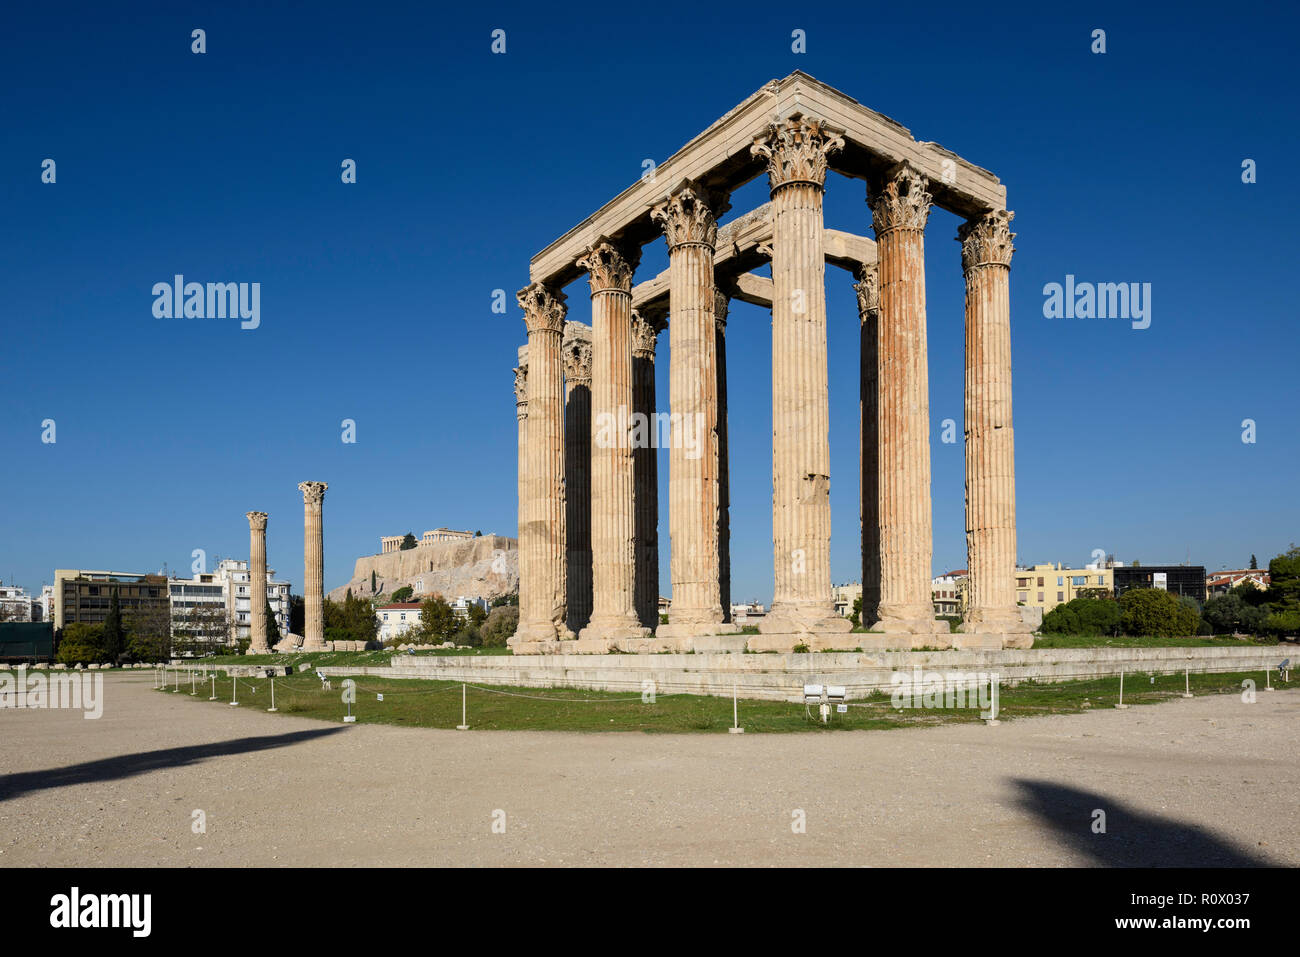 Athens. Greece. The Temple of Olympian Zeus (Olympieion) and the Acropolis in the background. Stock Photo